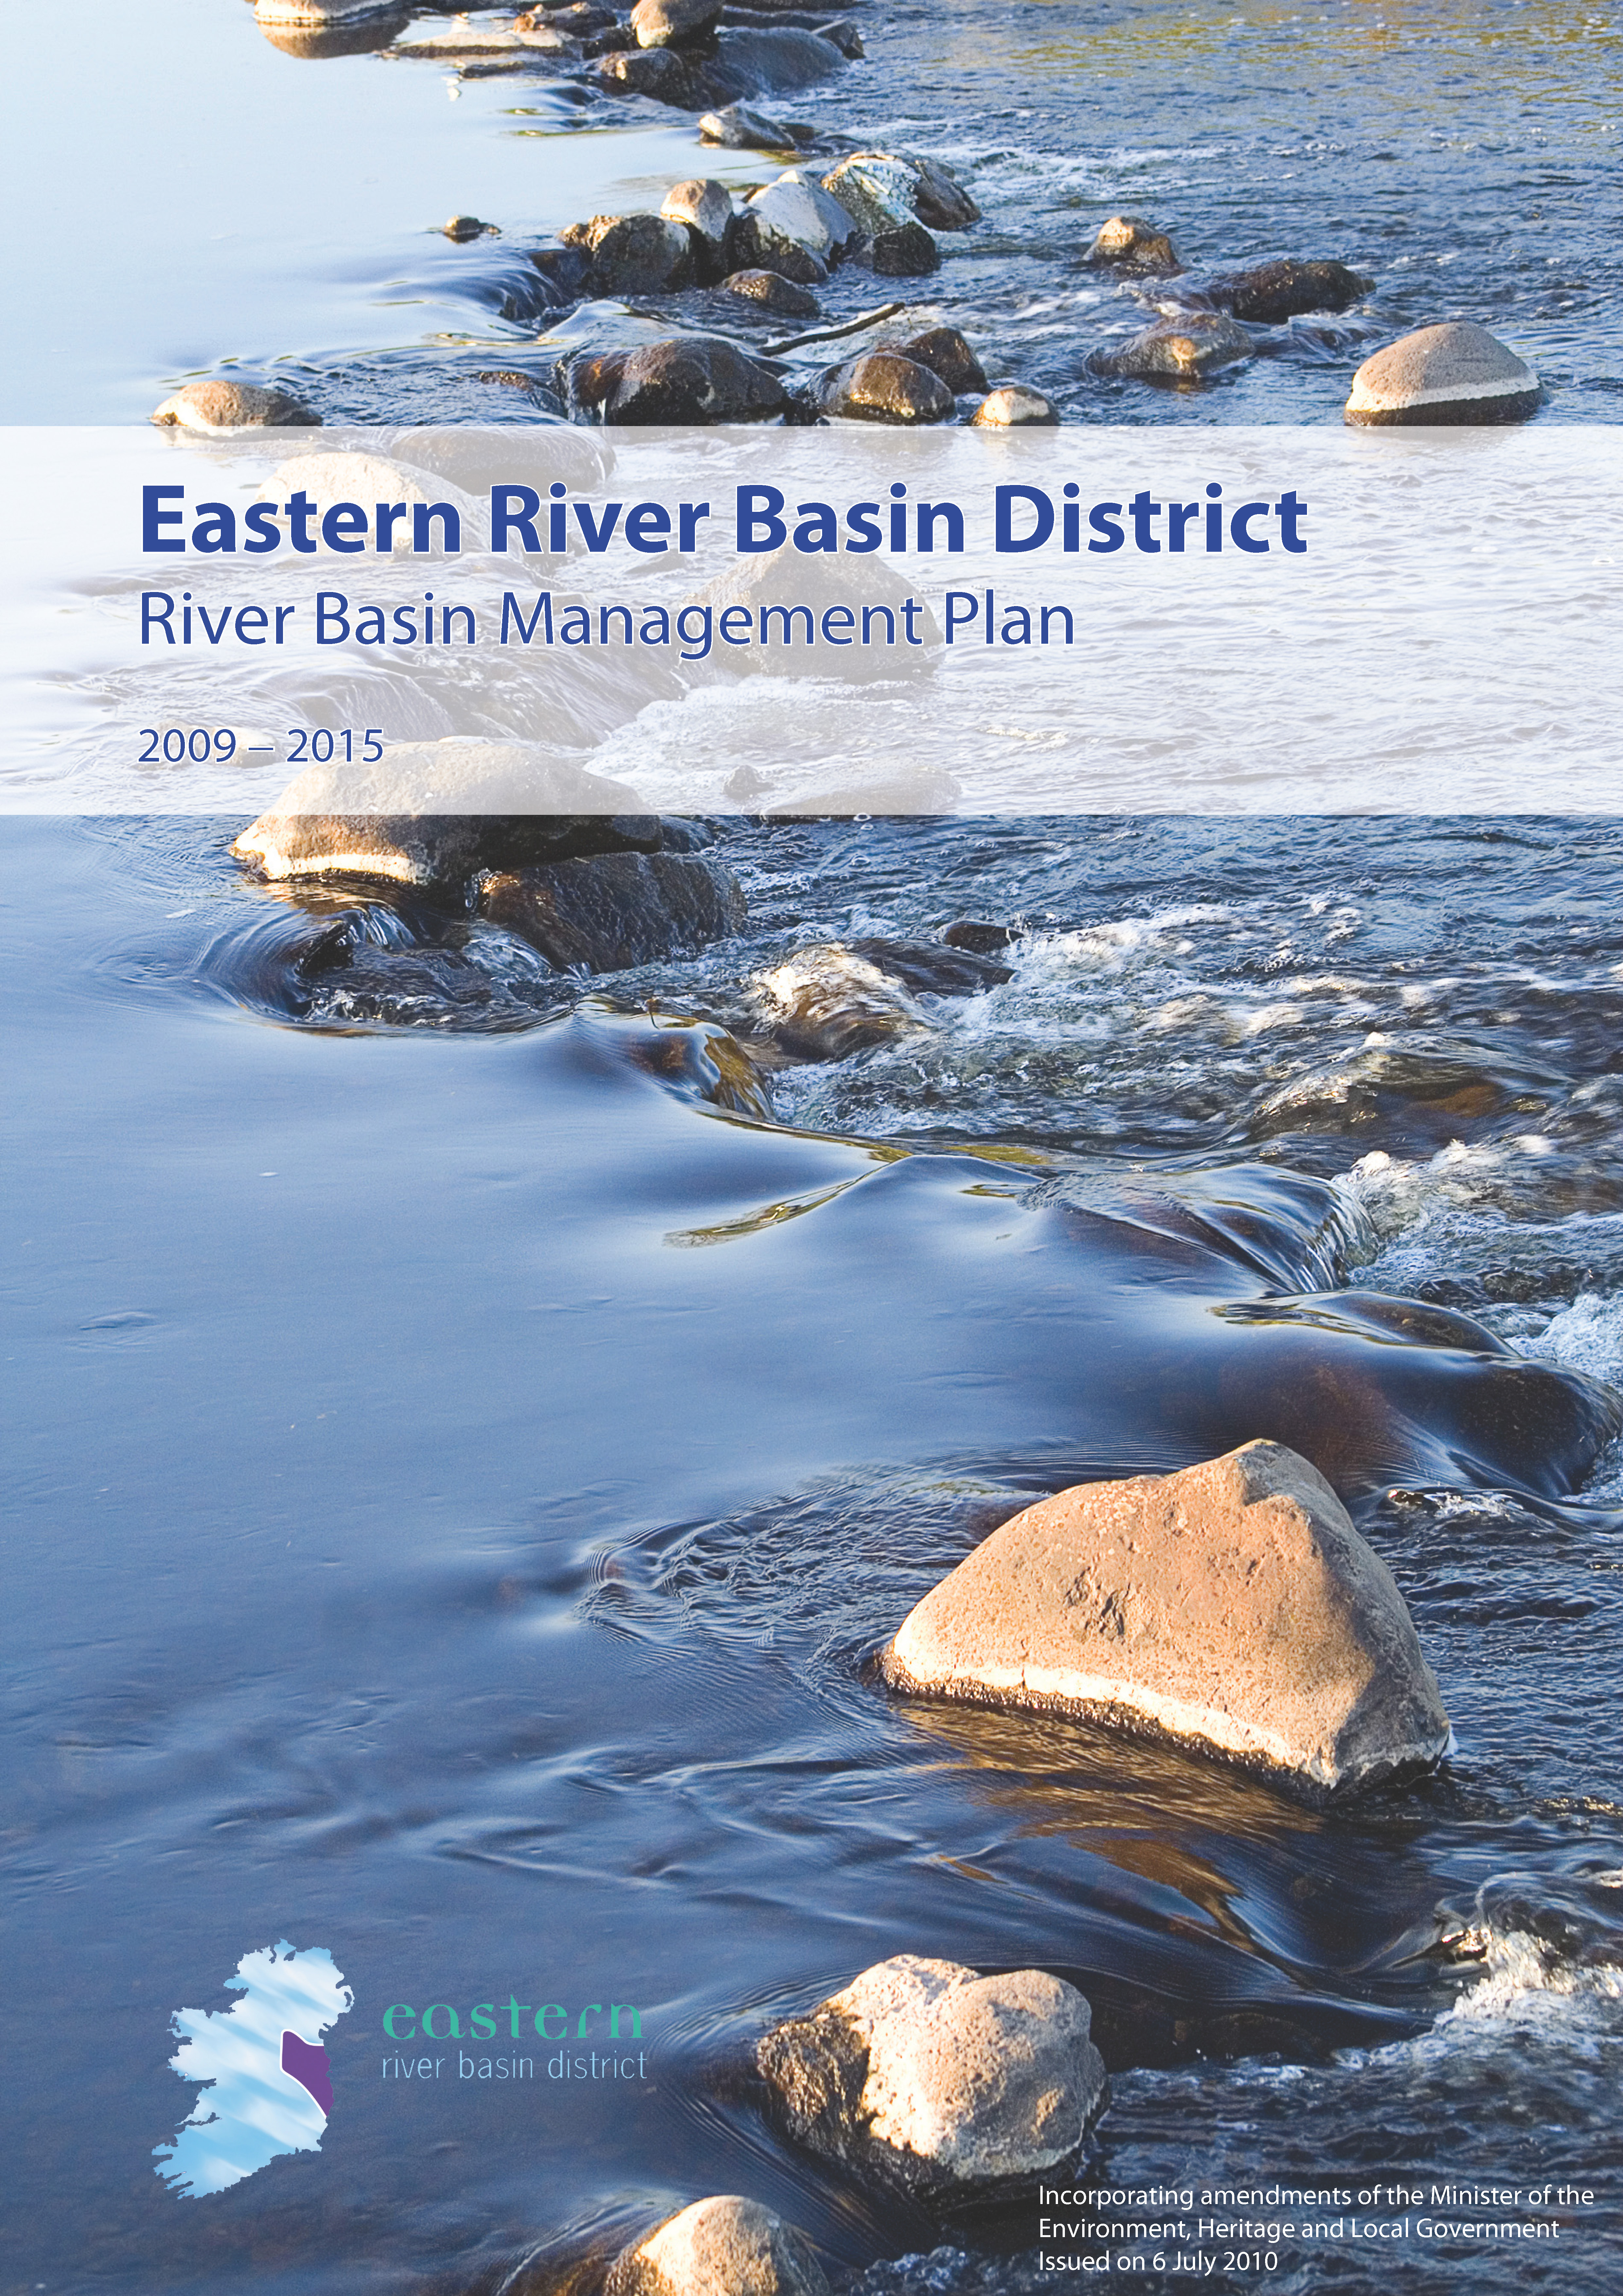 Cover from Eastern River Basin District River Basin Management Plan 6 July 2010